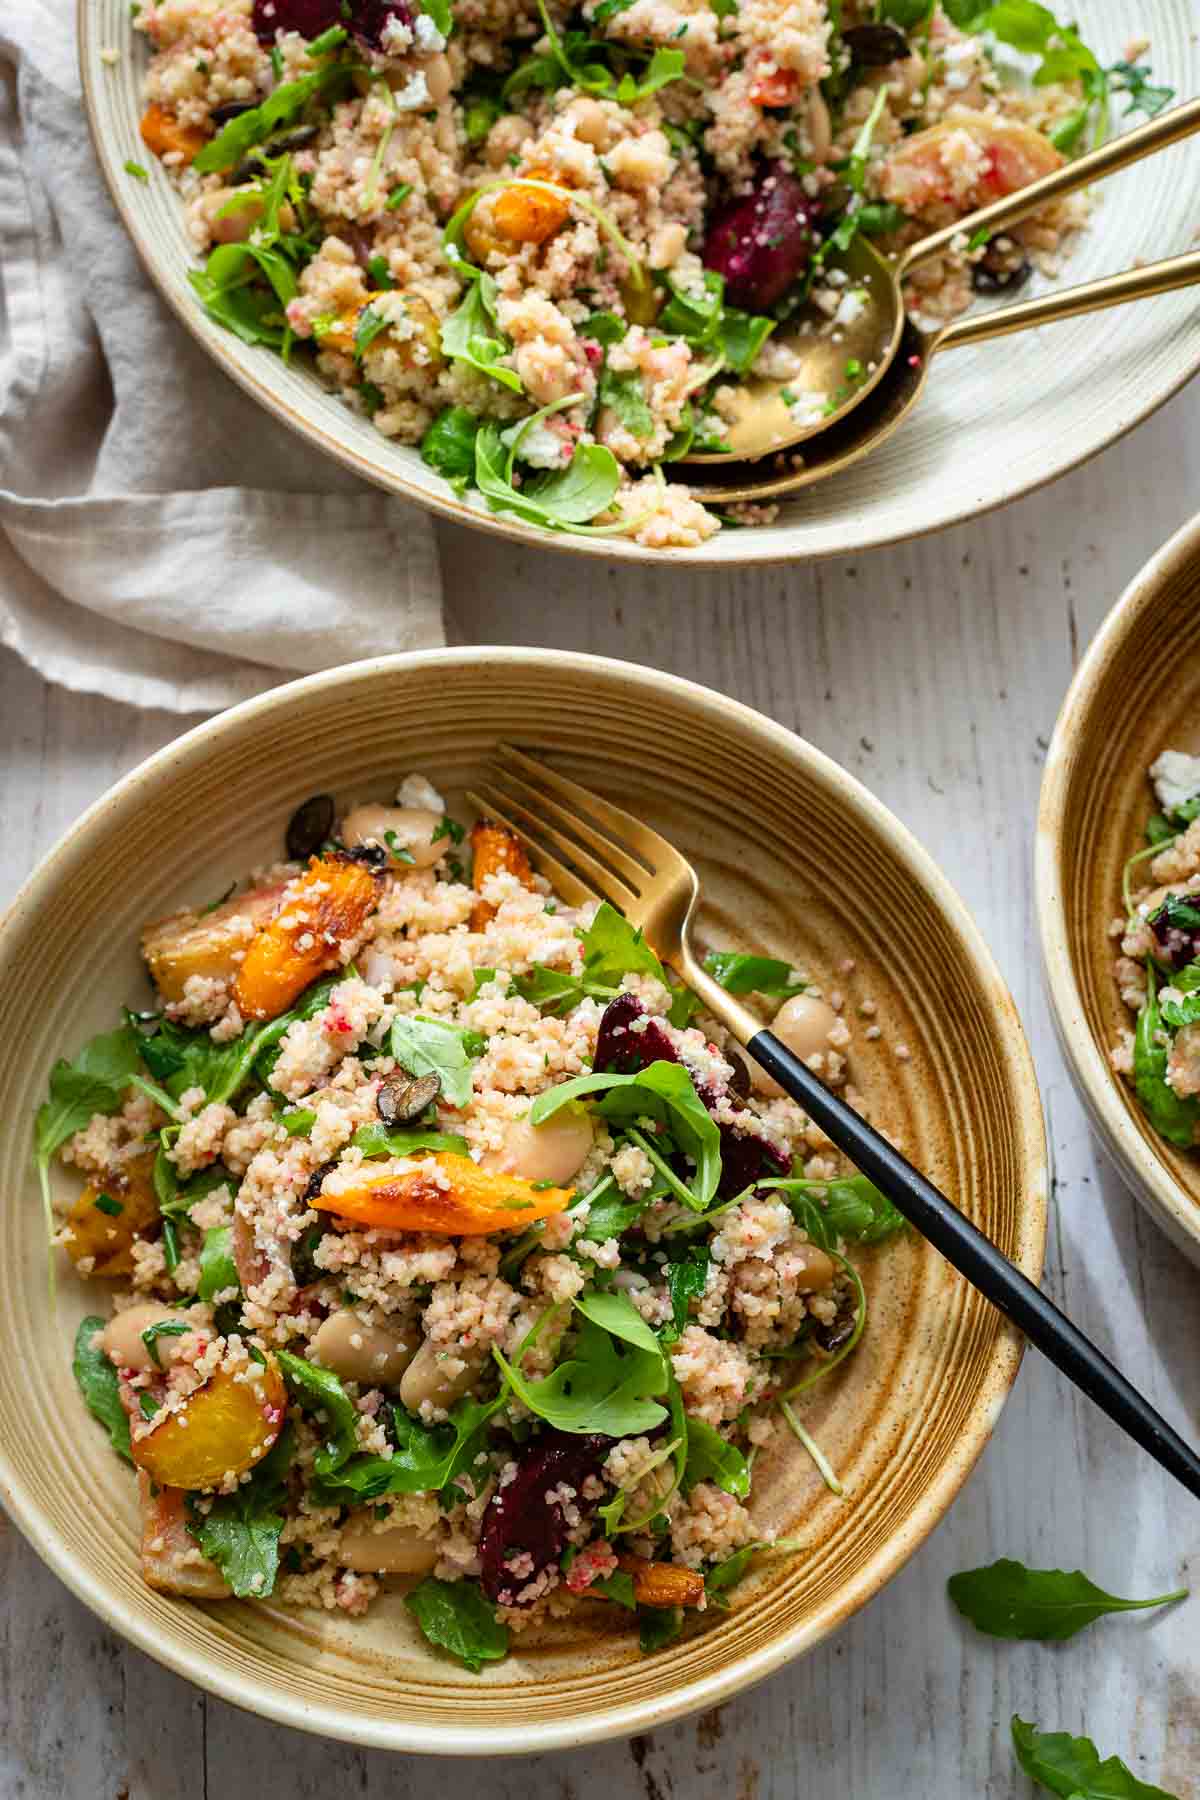 Couscous Salad with Beetroot and Carrots